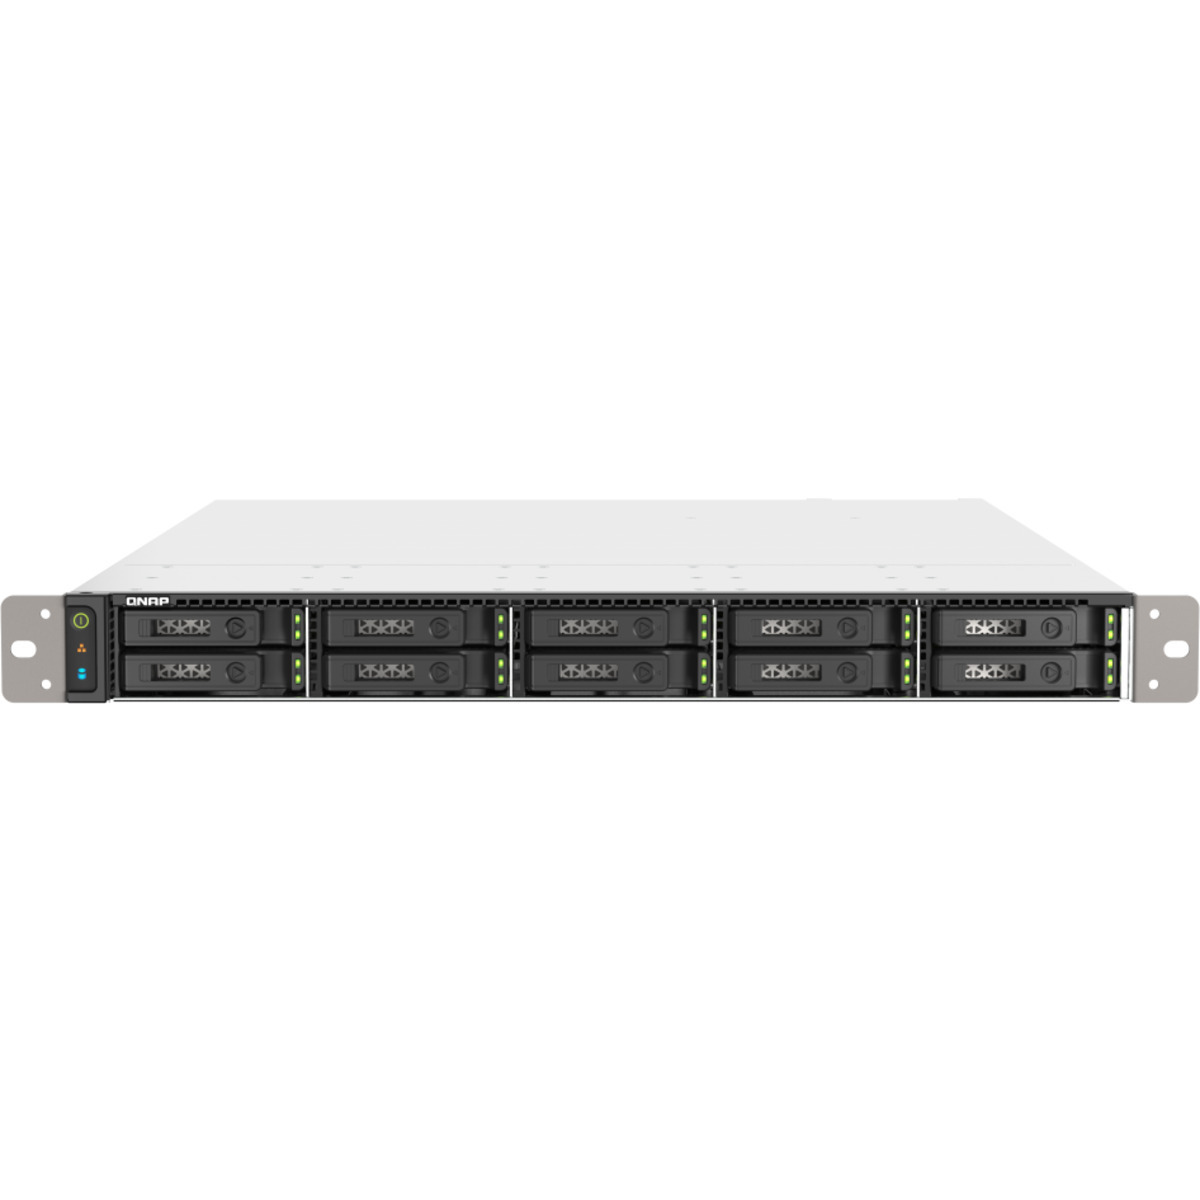 buy QNAP TS-h1090FU-7232P 10tb RackMount NAS - Network Attached Storage Device 10x1000gb Samsung 870 EVO MZ-77E1T0BAM 2.5 560/530MB/s SATA 6Gb/s SSD CONSUMER Class Drives Installed - Burn-In Tested - nas headquarters buy network attached storage server device das new raid-5 free shipping simply usa TS-h1090FU-7232P